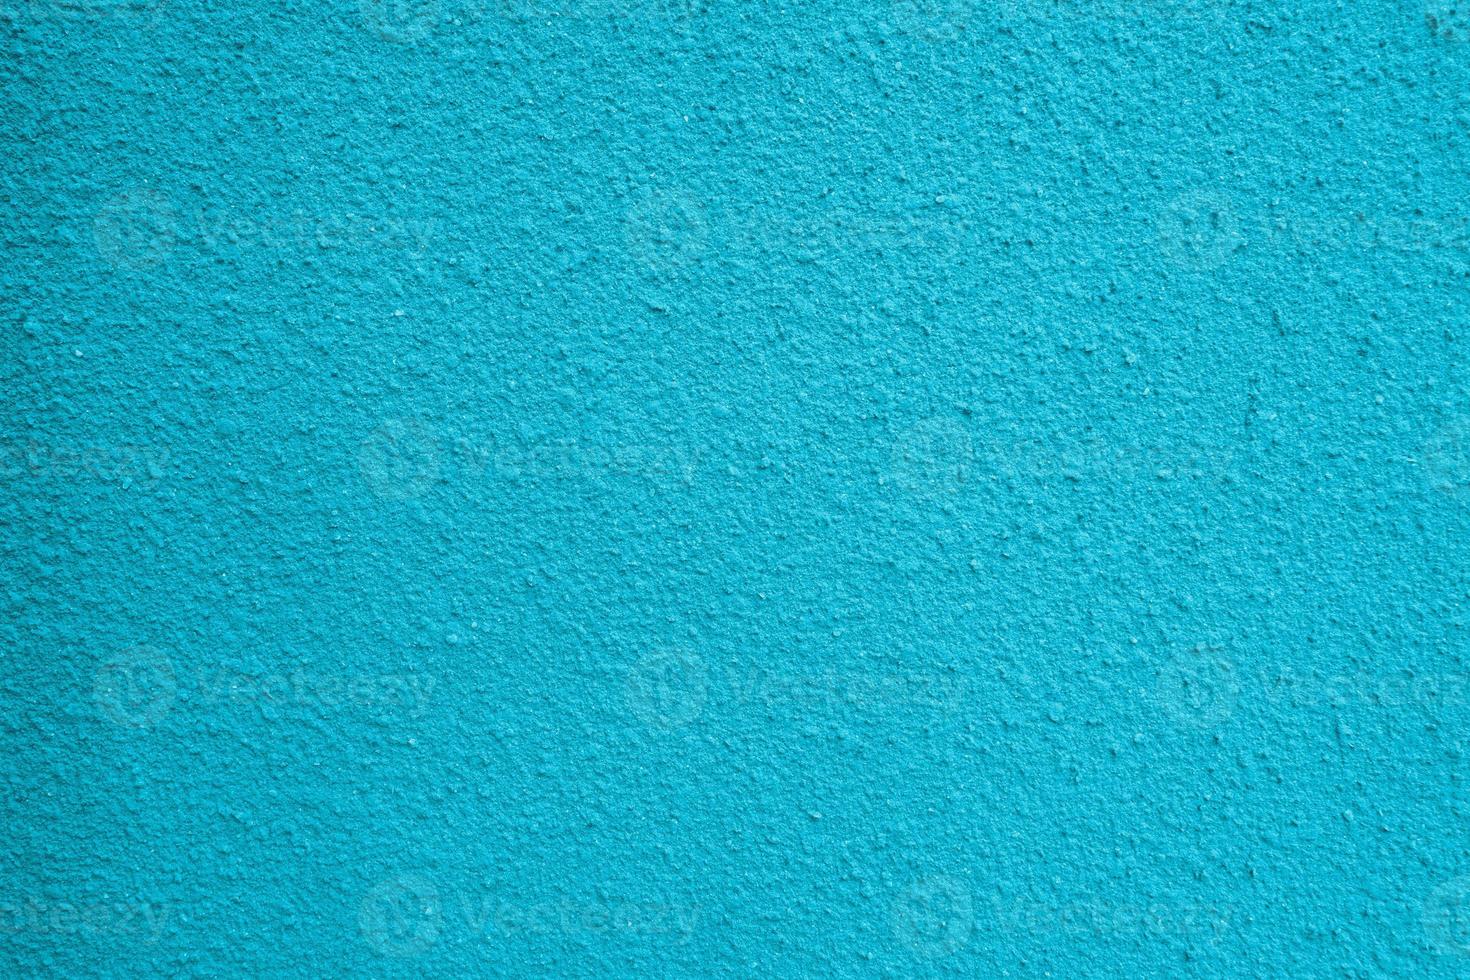 Cement concrete grunge wall texture background, turquoise blue and green color. photo